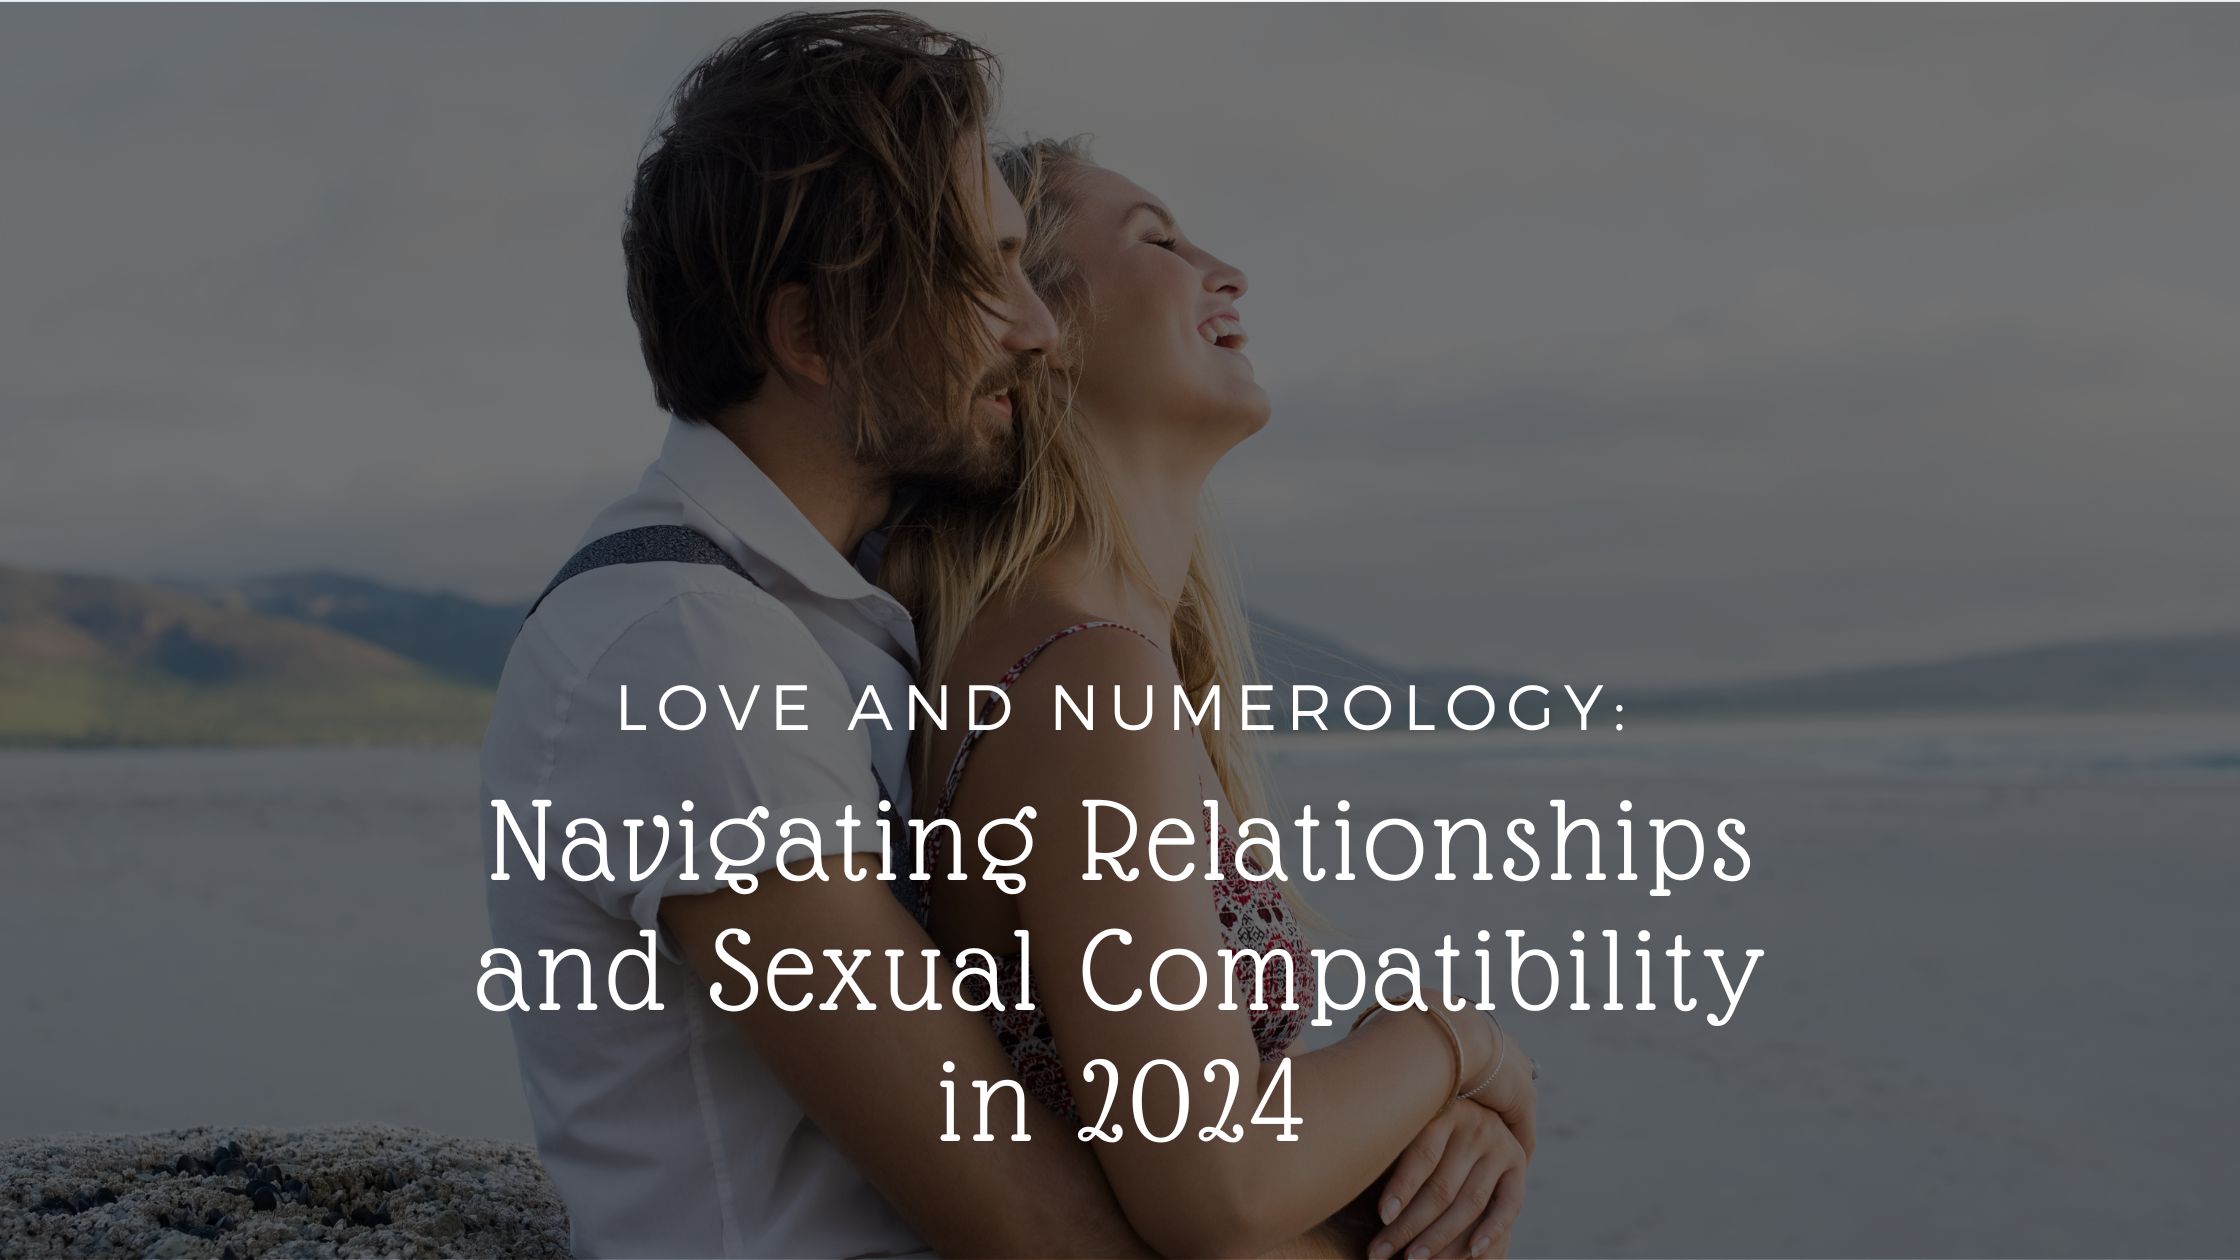 Navigating Relationships and Sexual Compatibility in 2024